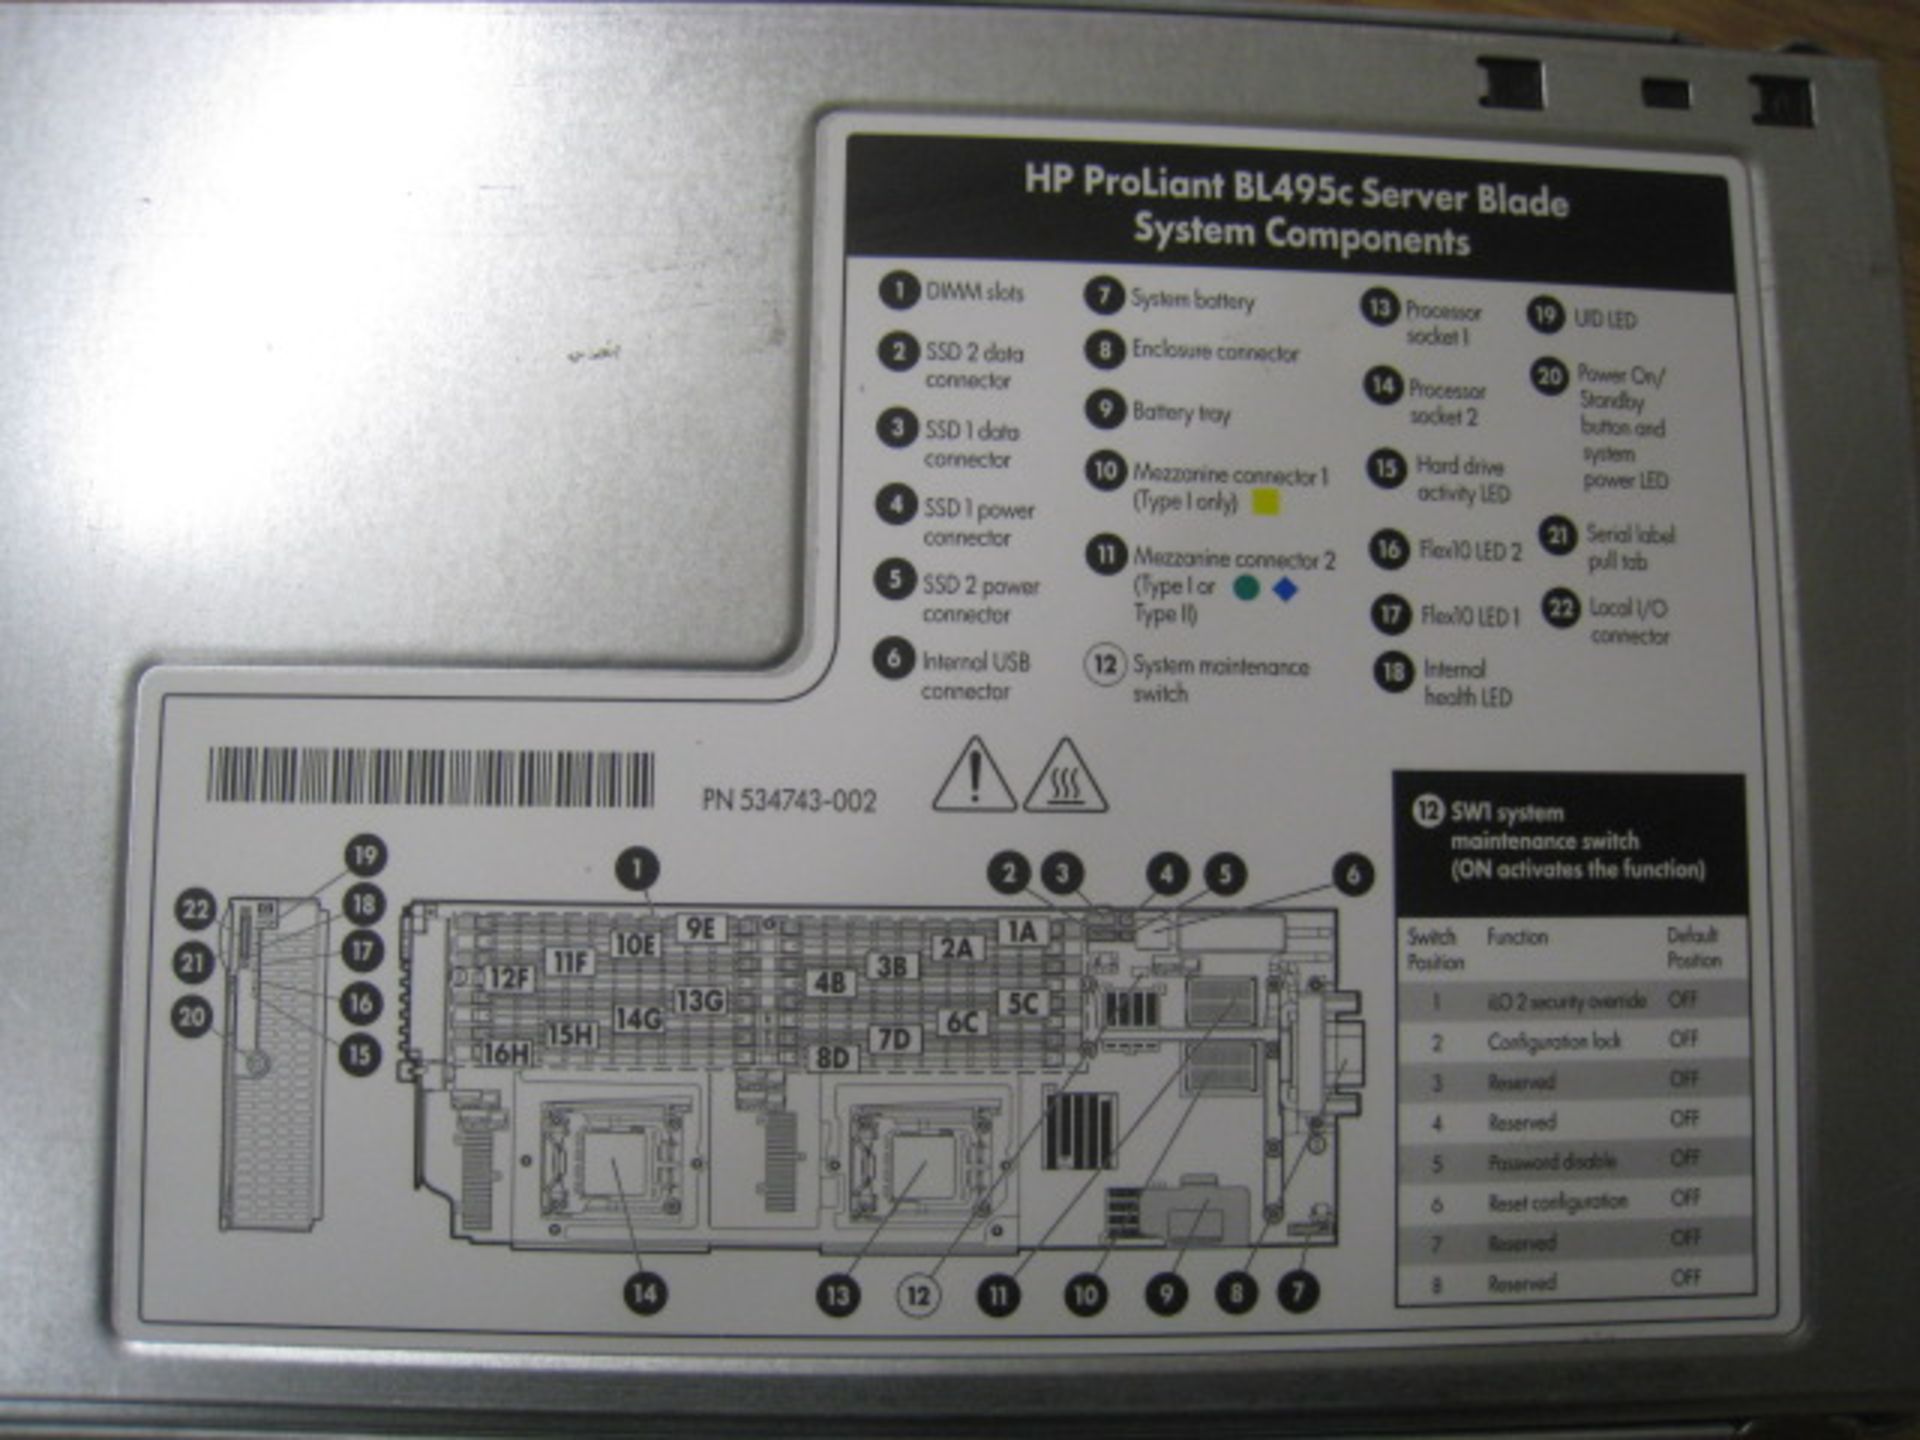 HP PROLIANT BL495c G6 SERVER BLADE. 2 X OPTERON SIX CORE 2.6GHZ (2435) PROCESSORS & 32GB RAM. - Image 2 of 2